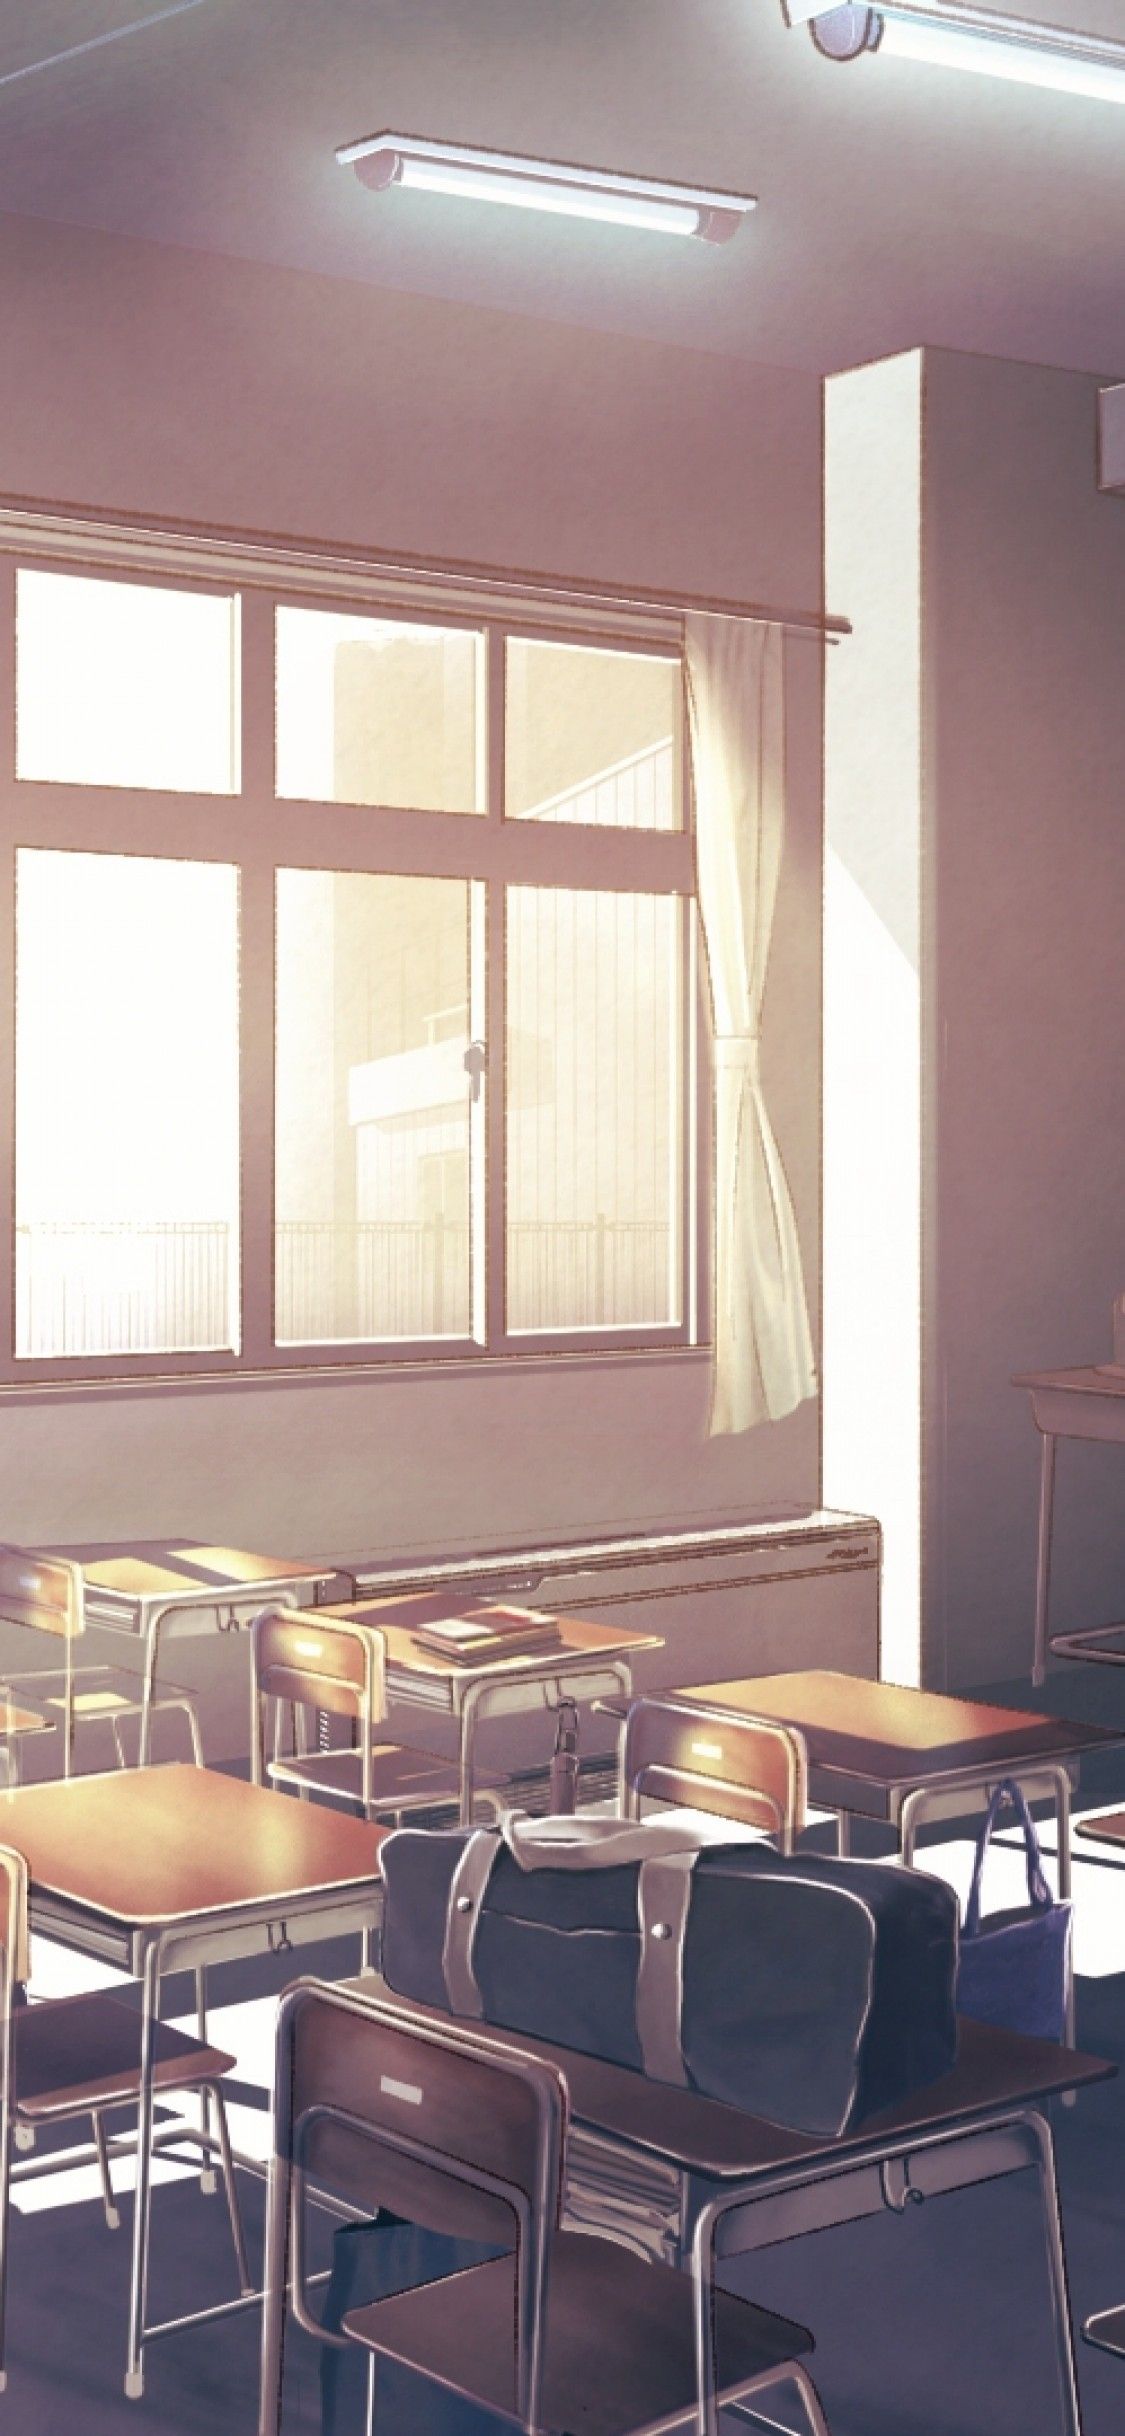 Download 1125x2436 Anime Classroom, Sunlight, Chairs, Scenic